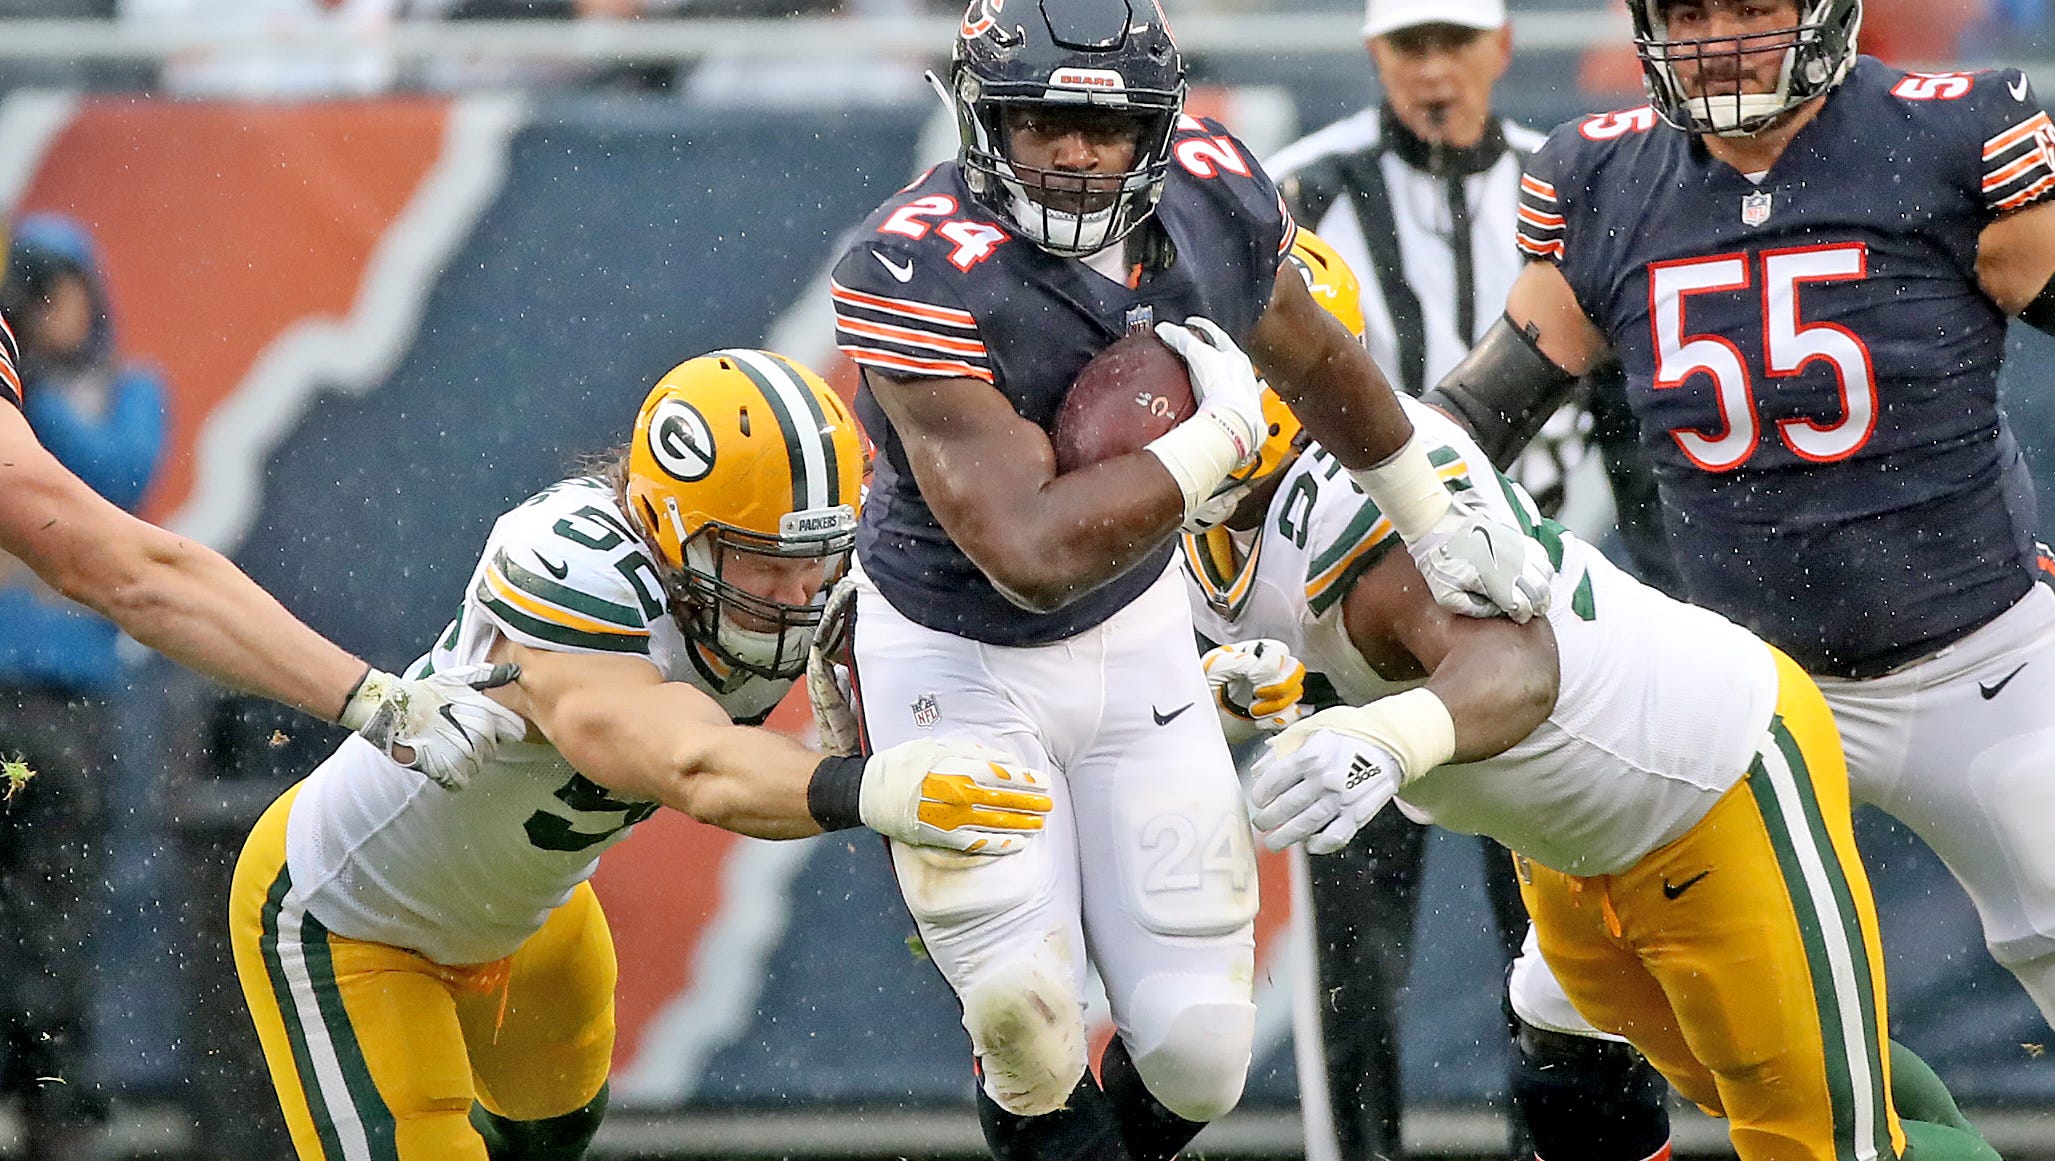 Green Bay Packers outside linebacker Clay Matthews (52) and try to tackle running back Jordan Howard (24) against the Chicago Bears Sunday, November 12, 2017 at Soldier Field in Chicago, Il.